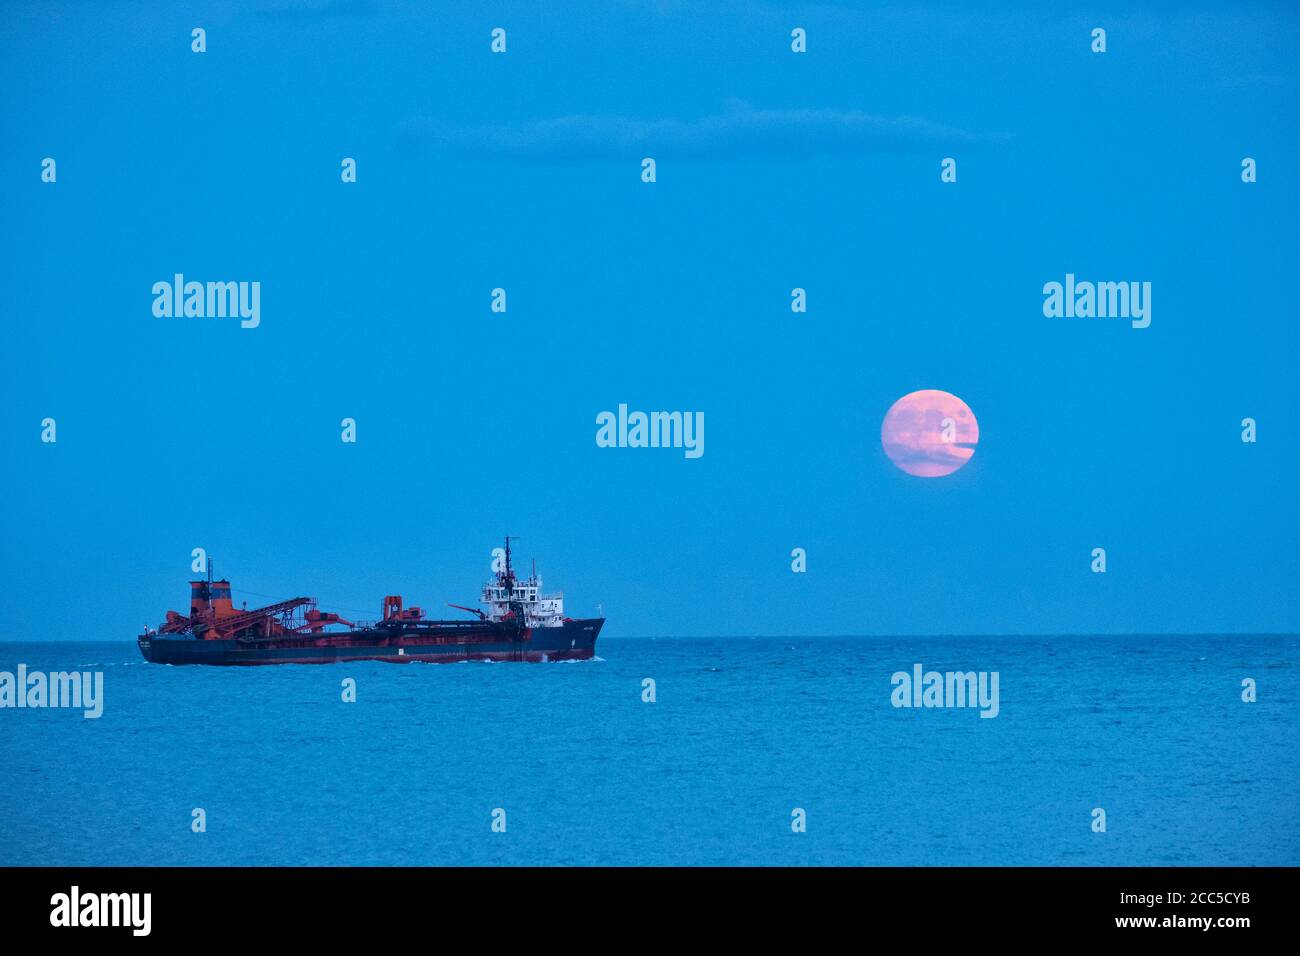 A ship (the hopper dredger Arco Avon) sailing in the English Channel off Deal, Kent, UK, under a rising full moon in August Stock Photo